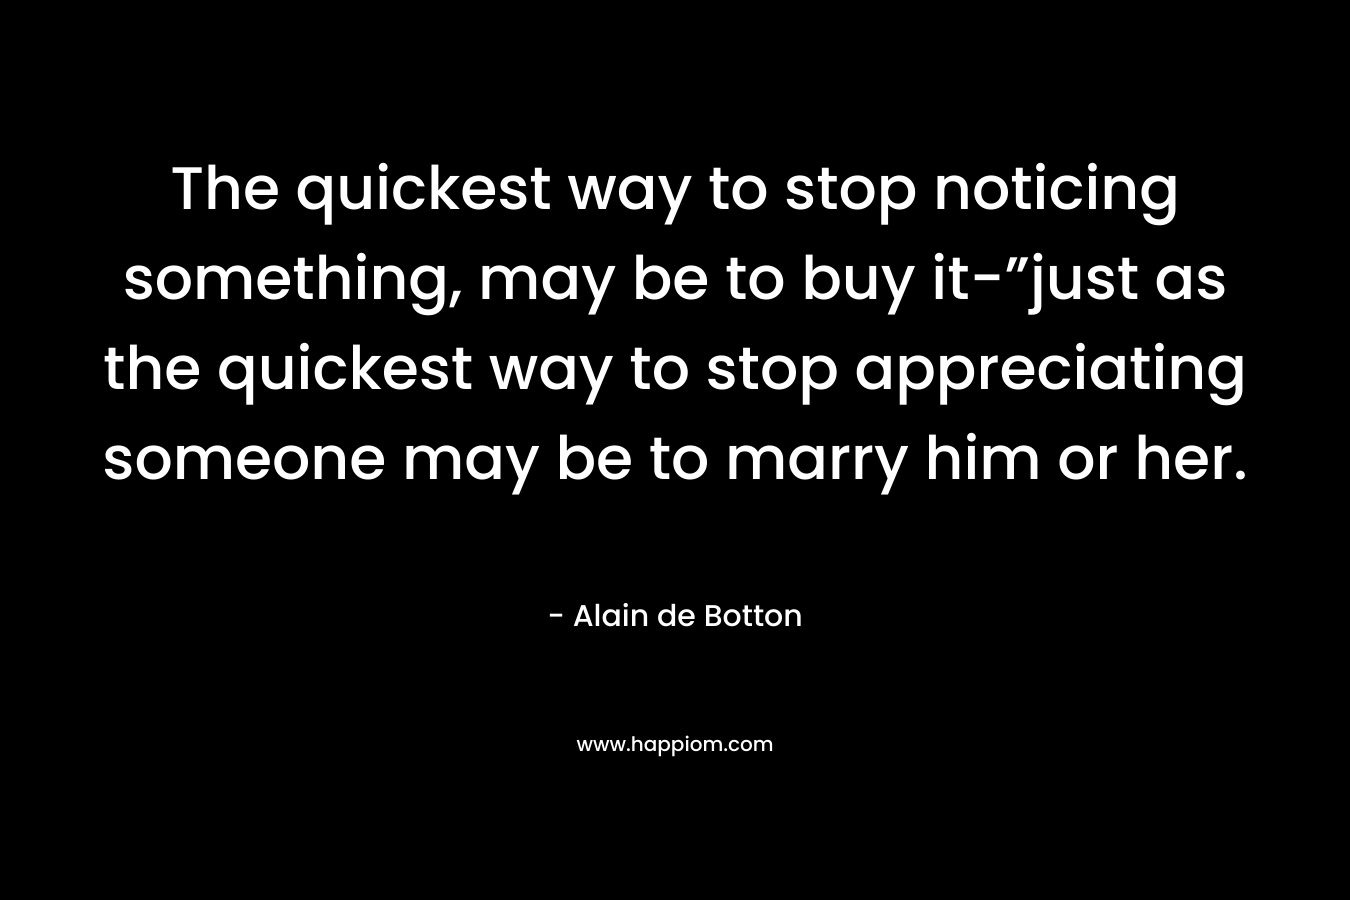 The quickest way to stop noticing something, may be to buy it-”just as the quickest way to stop appreciating someone may be to marry him or her.